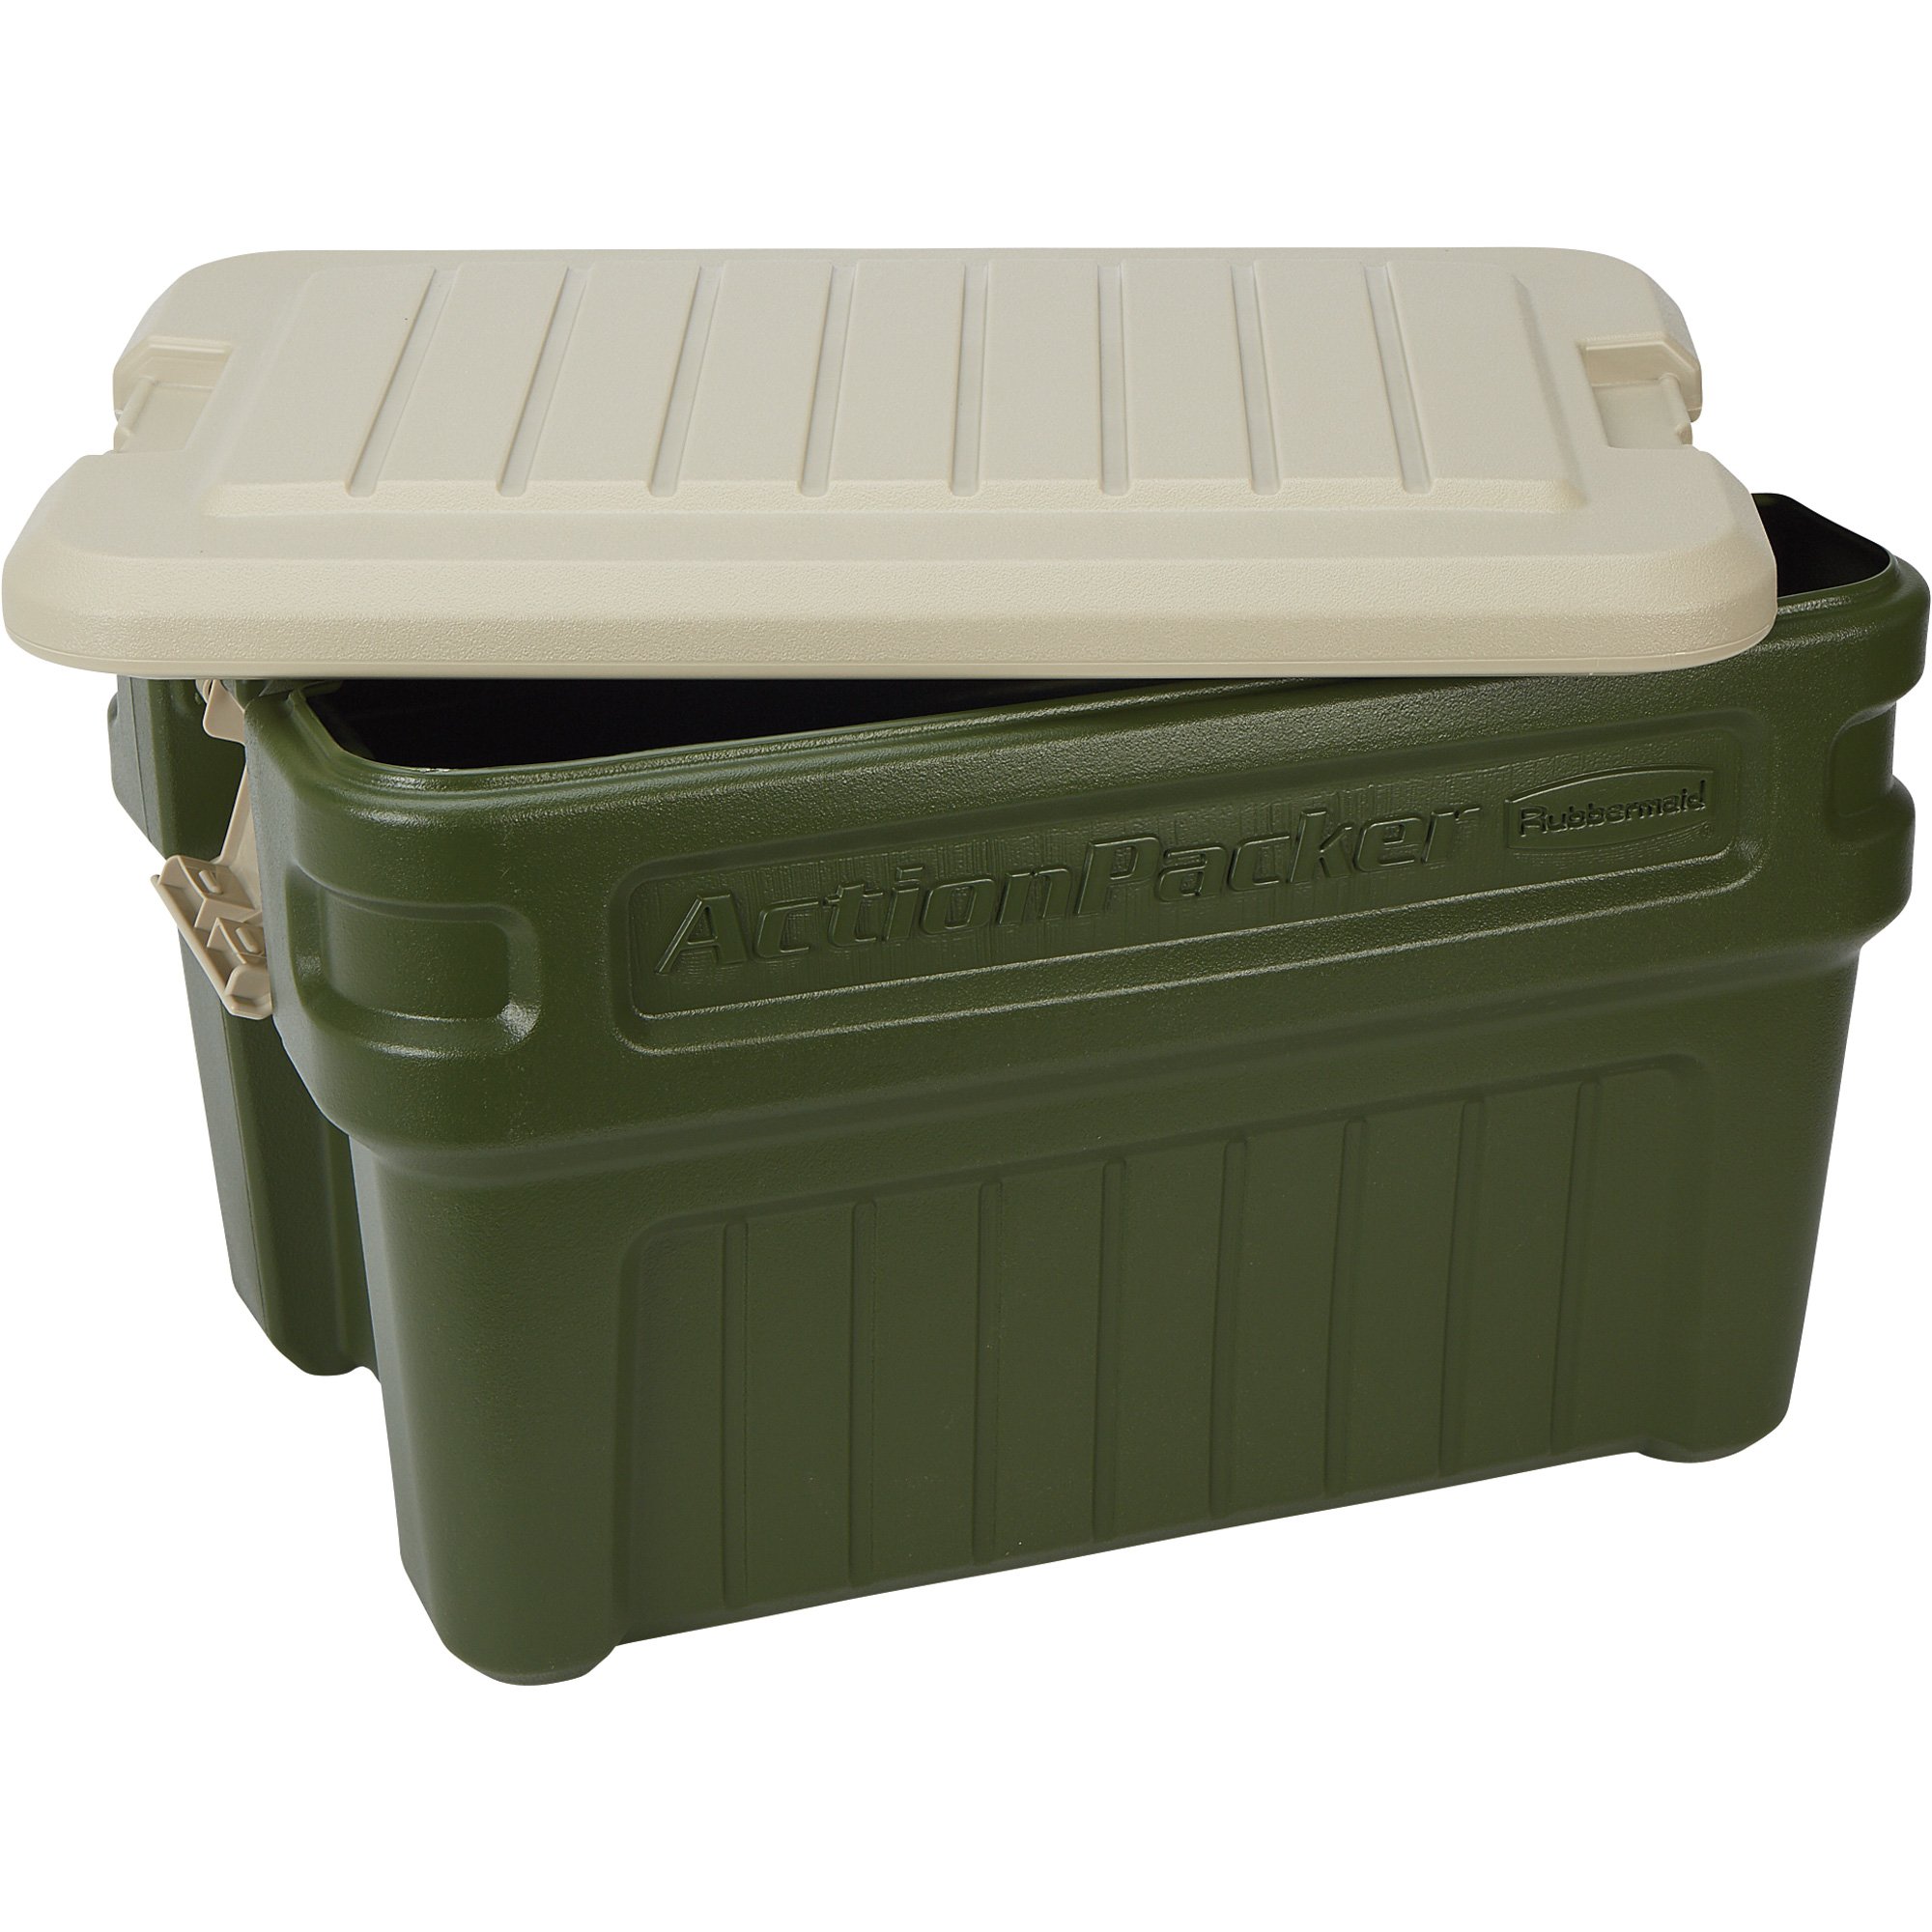 Rubbermaid Action Packer Heavy-Duty Storage Container — 24-Gallon